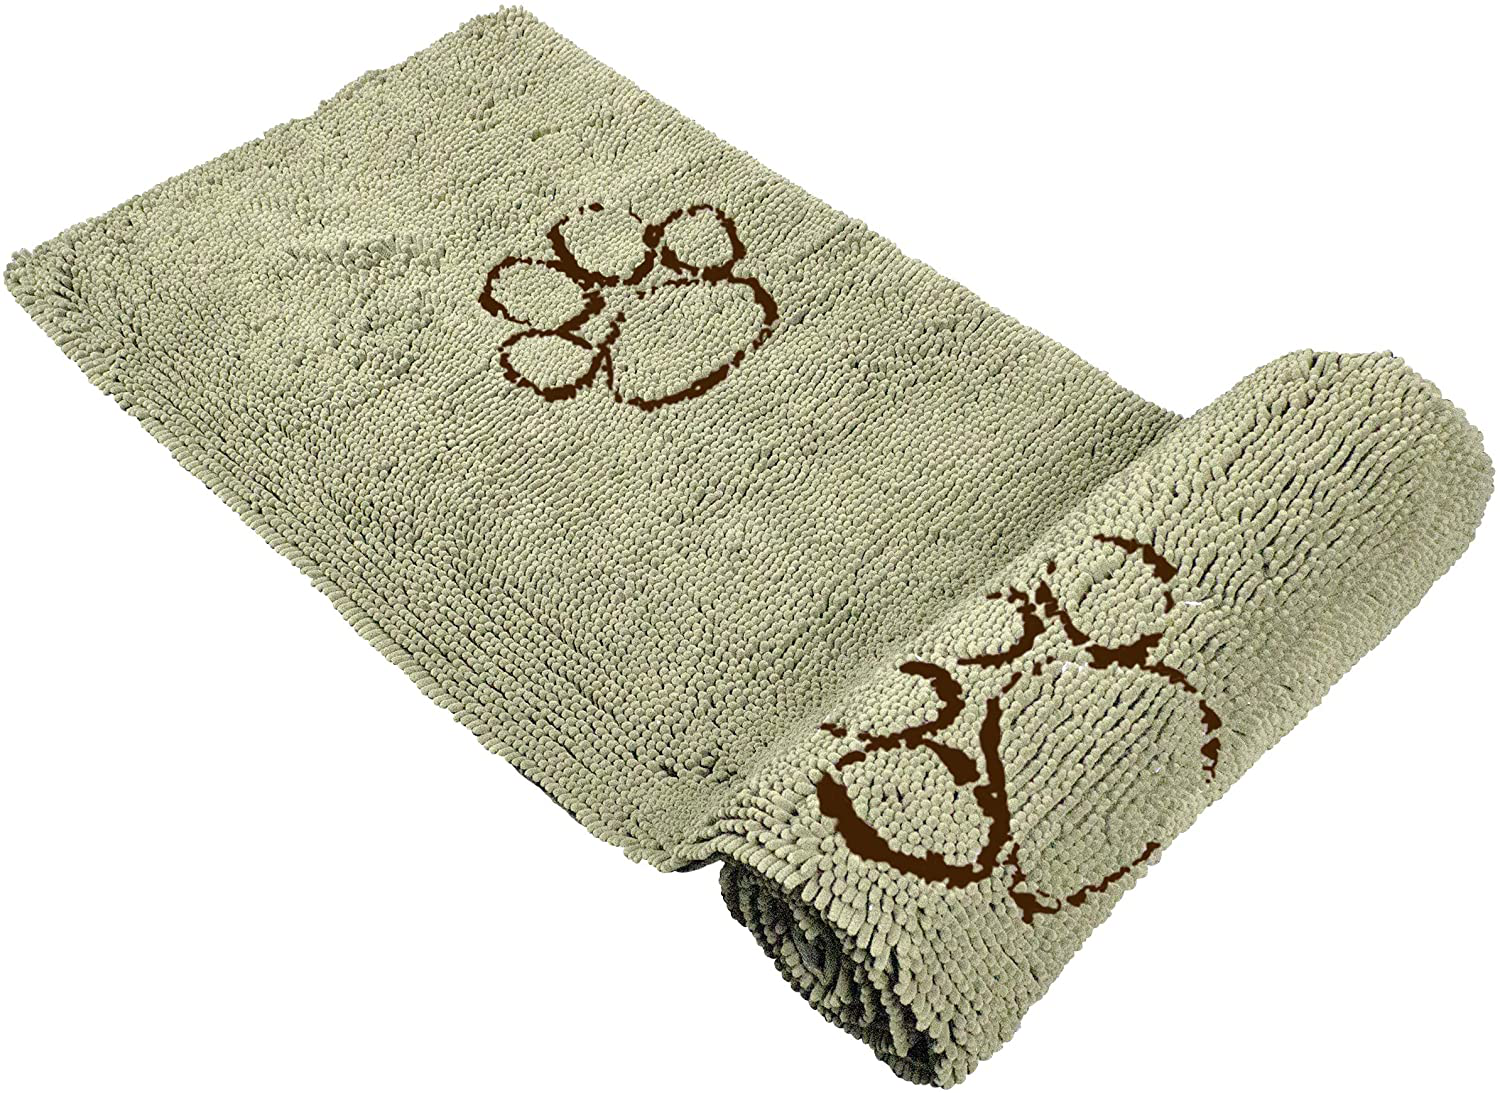 My Doggy Place - Ultra Absorbent Microfiber Dog Door Mat, Durable, Quick Drying, Washable, Prevent Mud Dirt, Keep Your House Clean (Sage Green W/Paw Print, Hallway Runner) - 8' X 2' Feet Animals & Pet Supplies > Pet Supplies > Dog Supplies > Dog Houses Downtown Pet Supply   